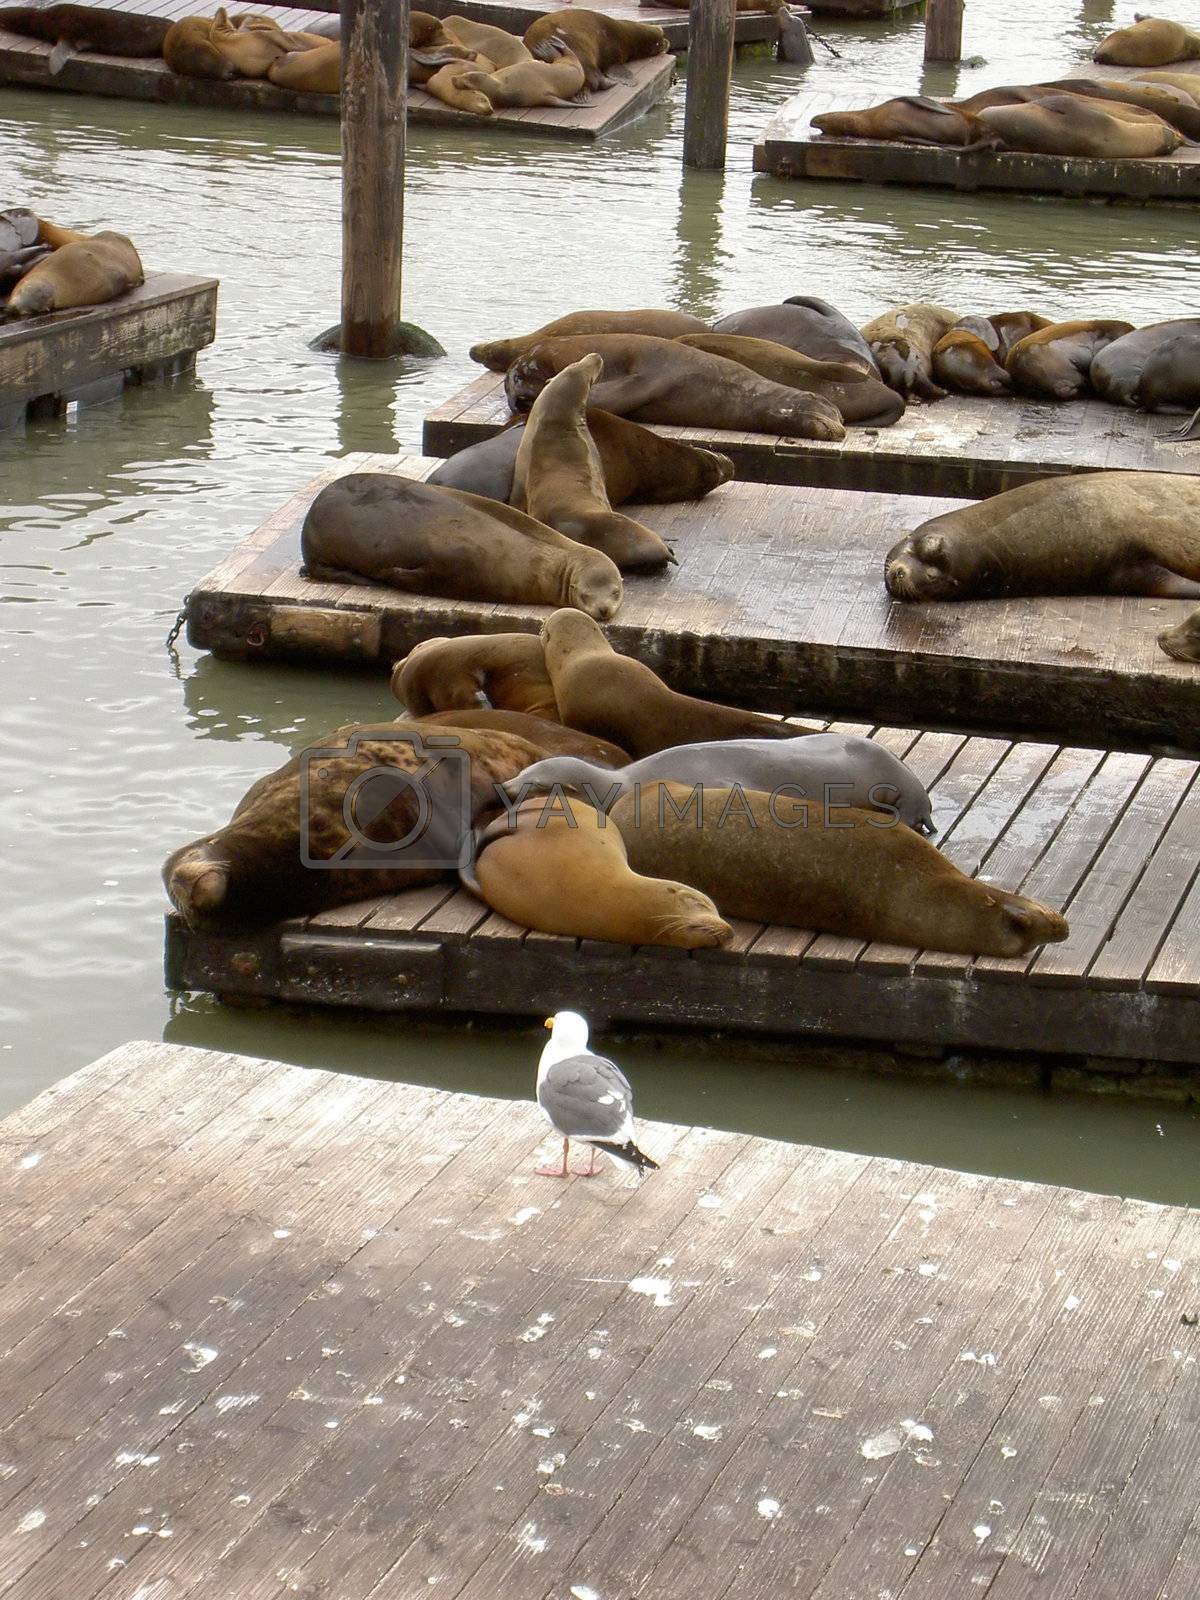 Royalty free image of Sea lions at Pier 39 in San Francisco by cvoogt